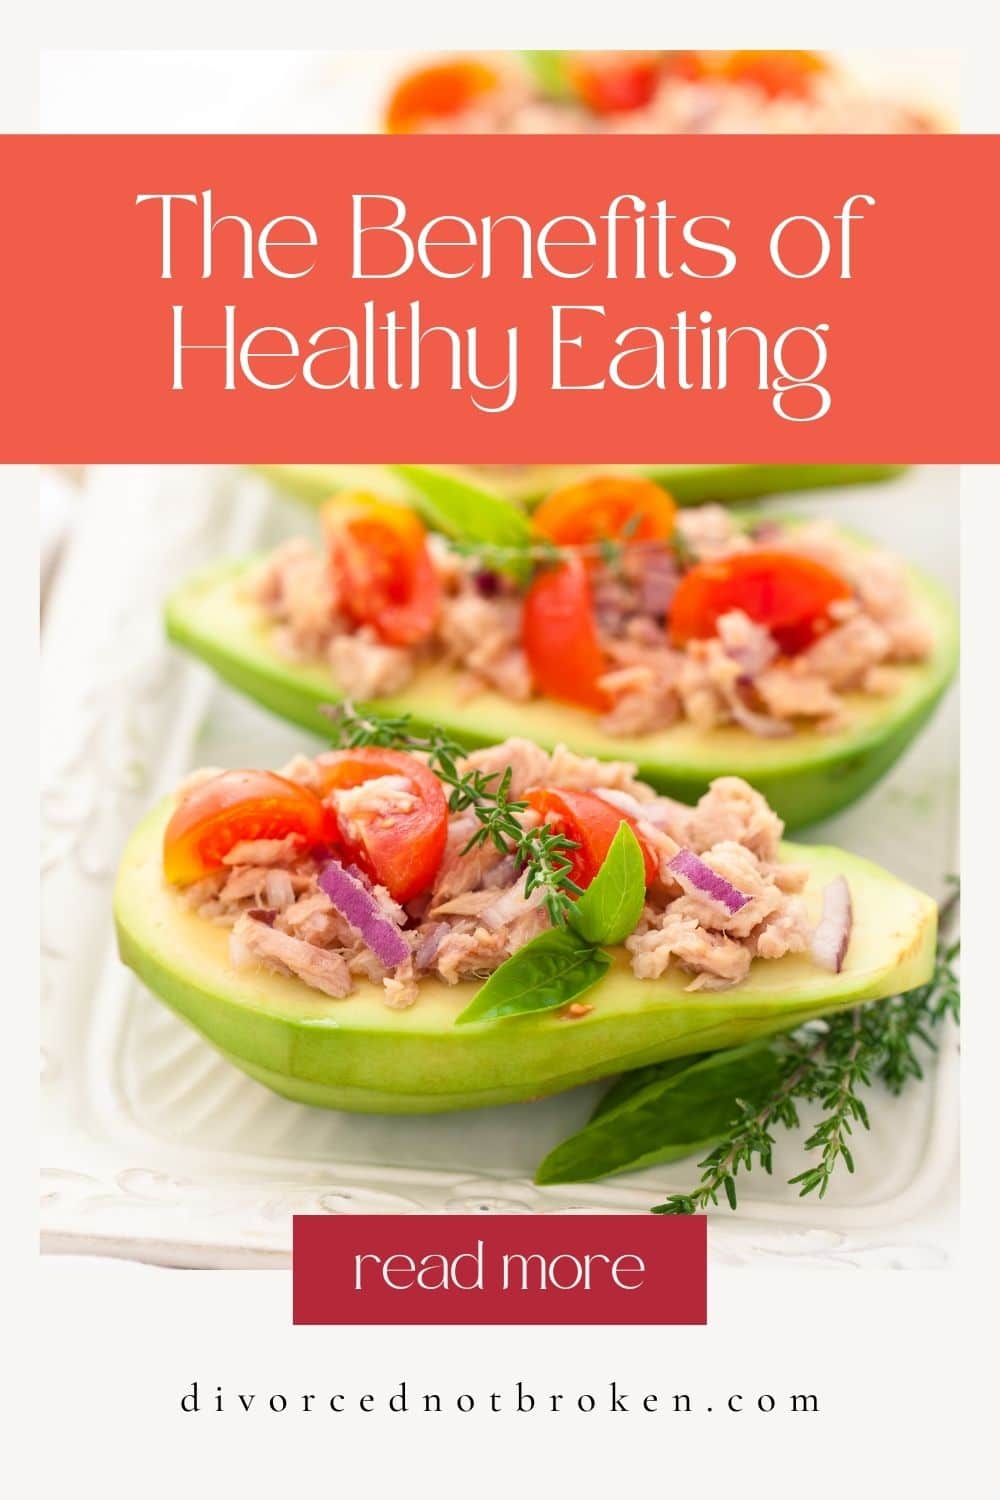 The Benefits of Healthy Eating in orange overlay with stuffed avocados on a plate.